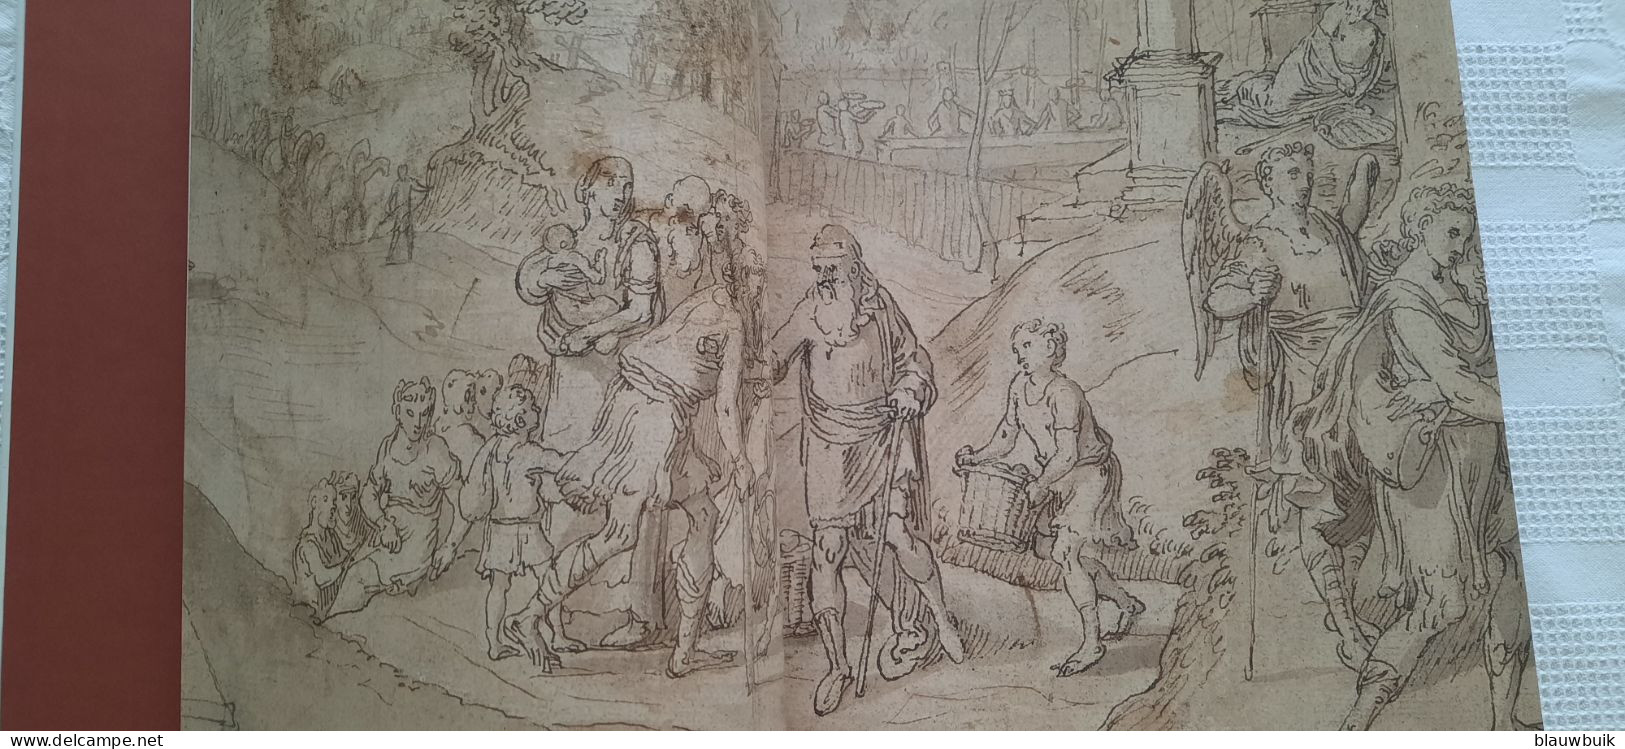 European Old Masters Drawings From The Bruges Print Room - Art History/Criticism